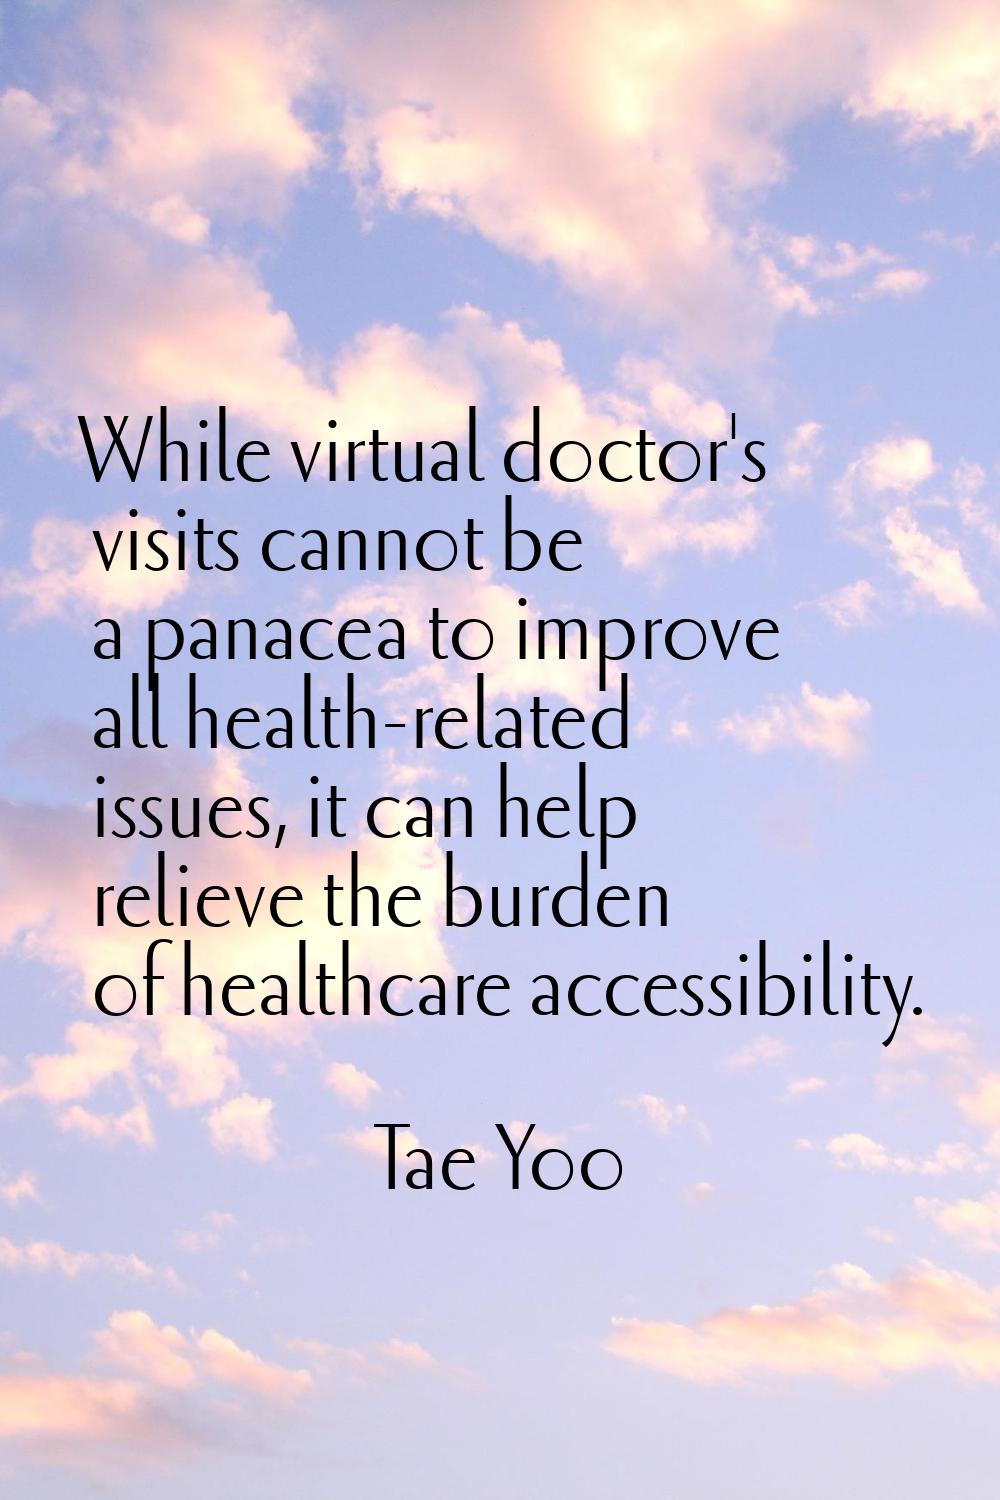 While virtual doctor's visits cannot be a panacea to improve all health-related issues, it can help